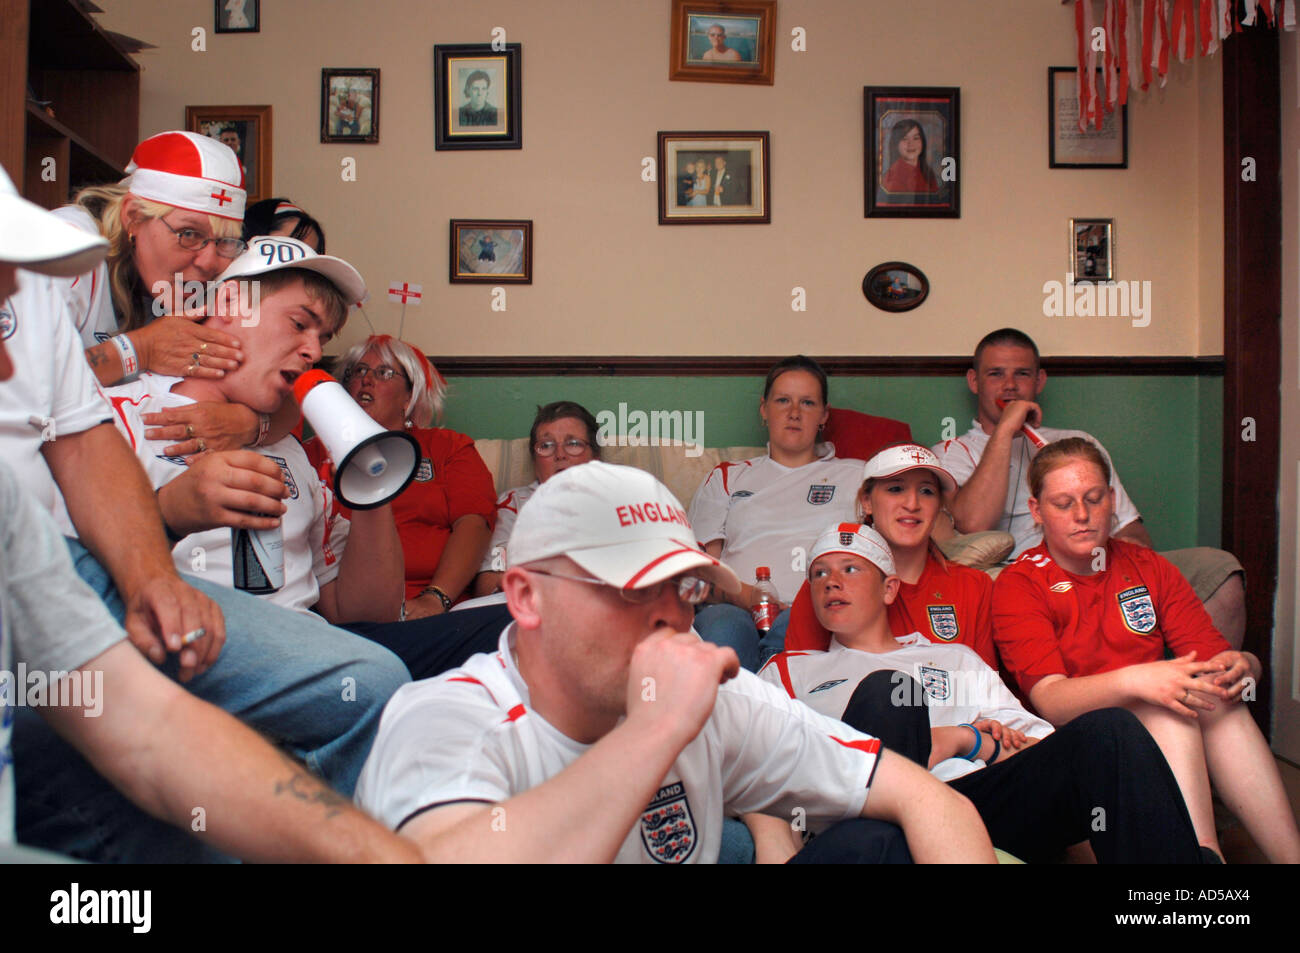 England Football Supporters At Home,Watching Match On TV Stock Photo